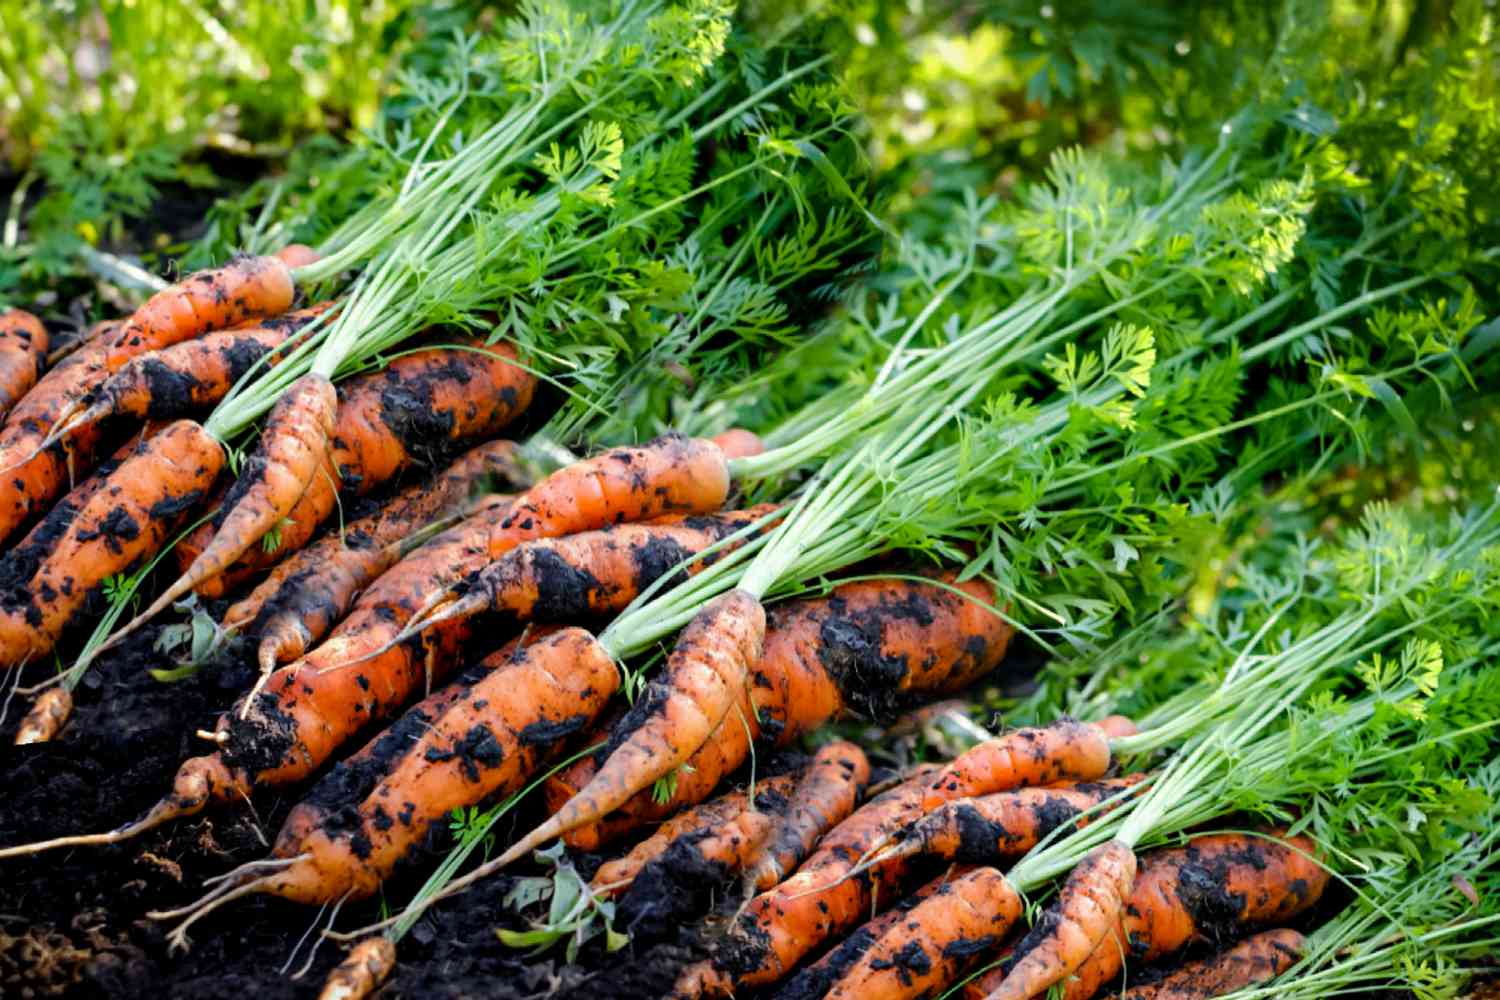 Crop Rotation: What To Plant After Carrots